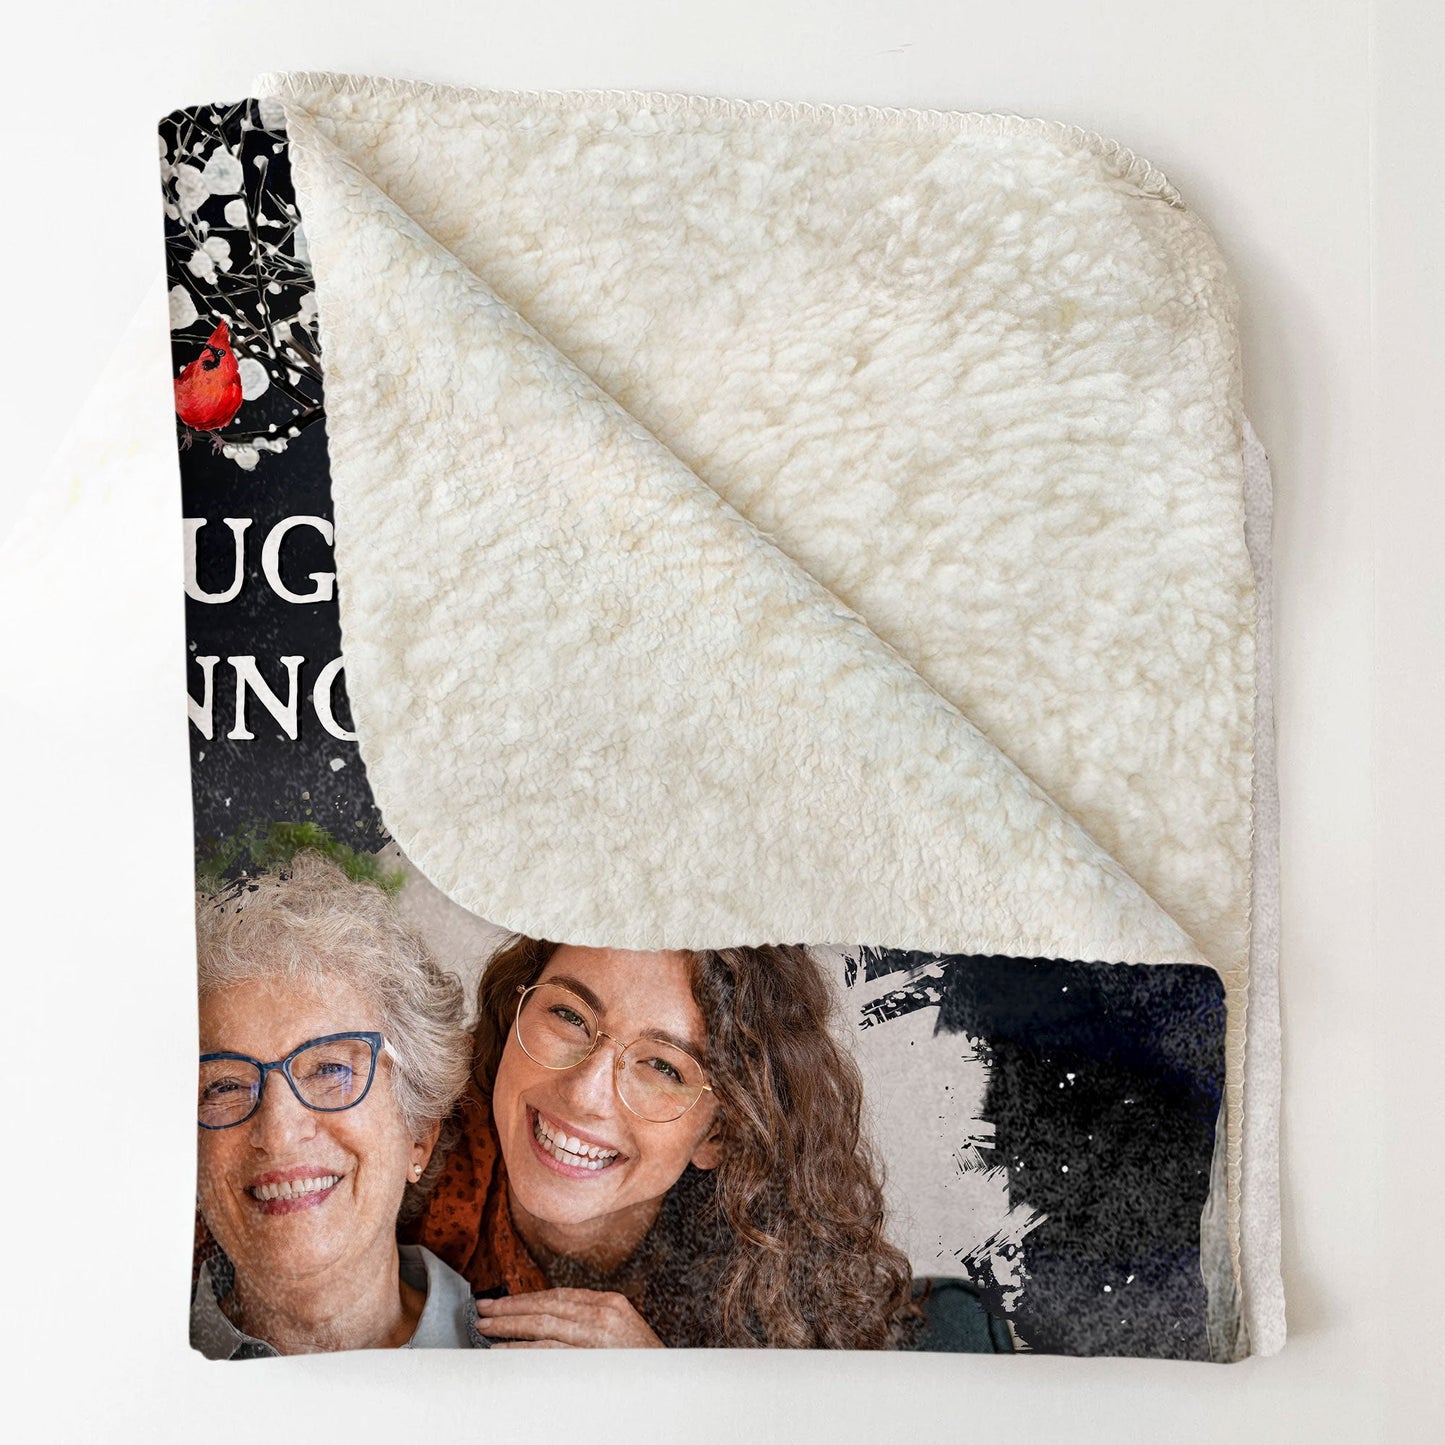 I Am Always With You - Personalized Photo Blanket